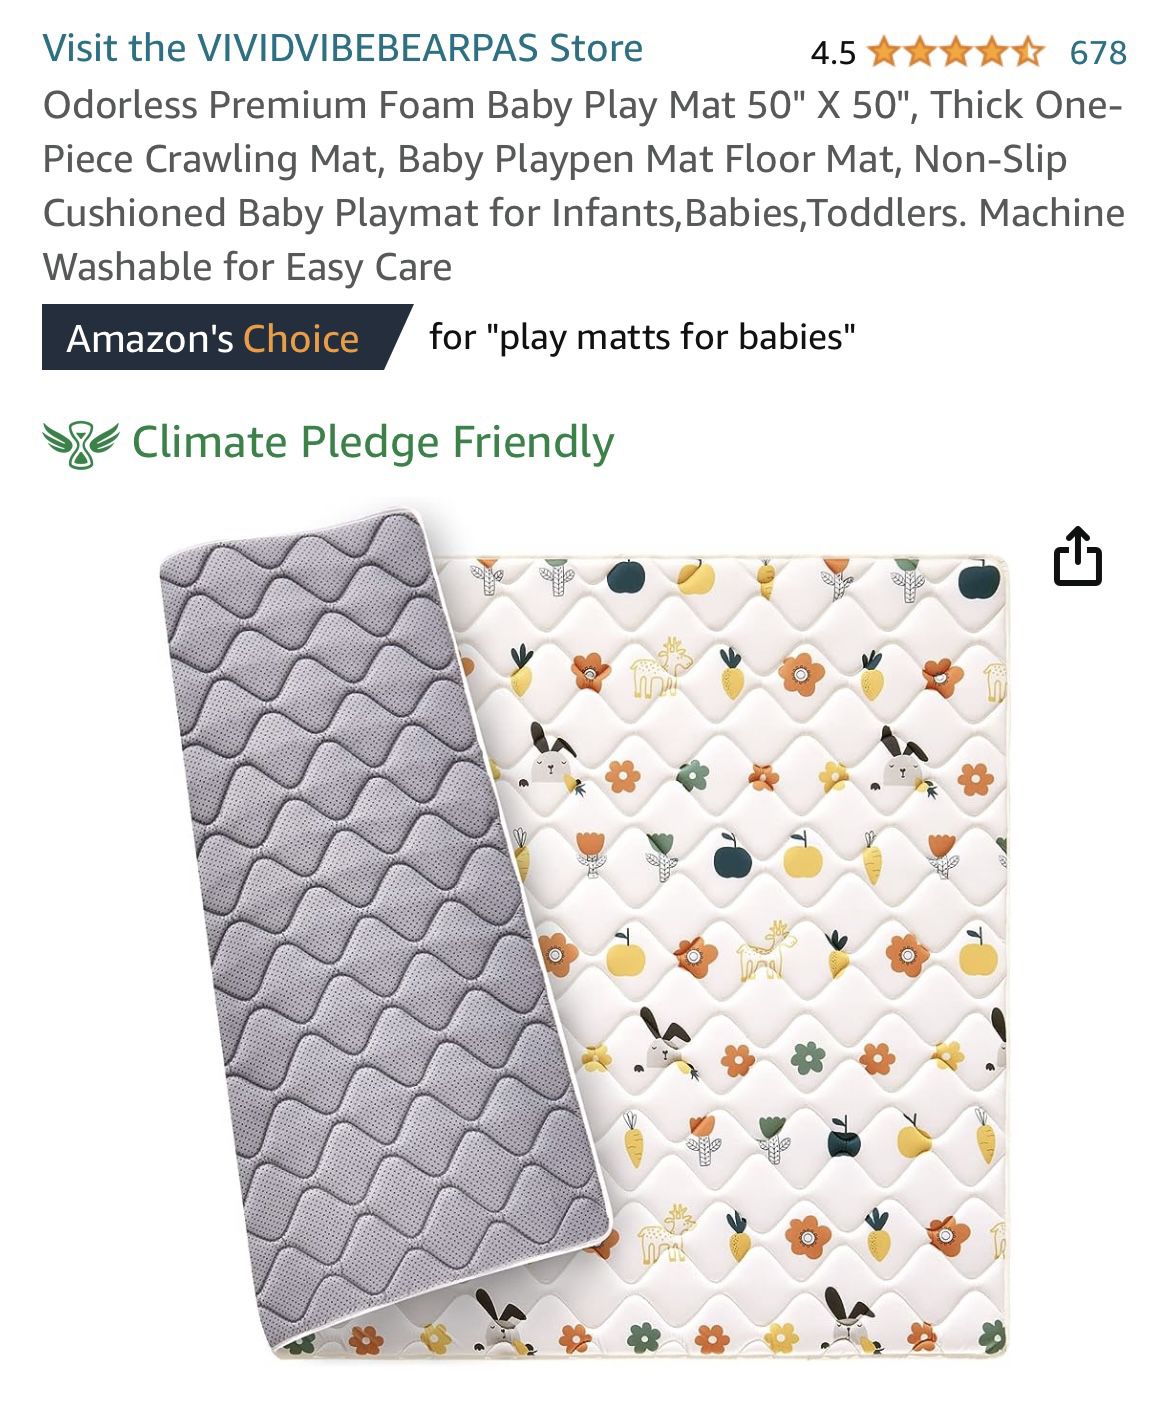  Premium Foam Baby Play Mat 50 X 50, Thick One-Piece  Crawling, Odorless Floor Mat, Non-Slip Cushioned Baby Playmat for  Infants,Babies,Toddlers. Machine Washable for Easy Care. : Baby